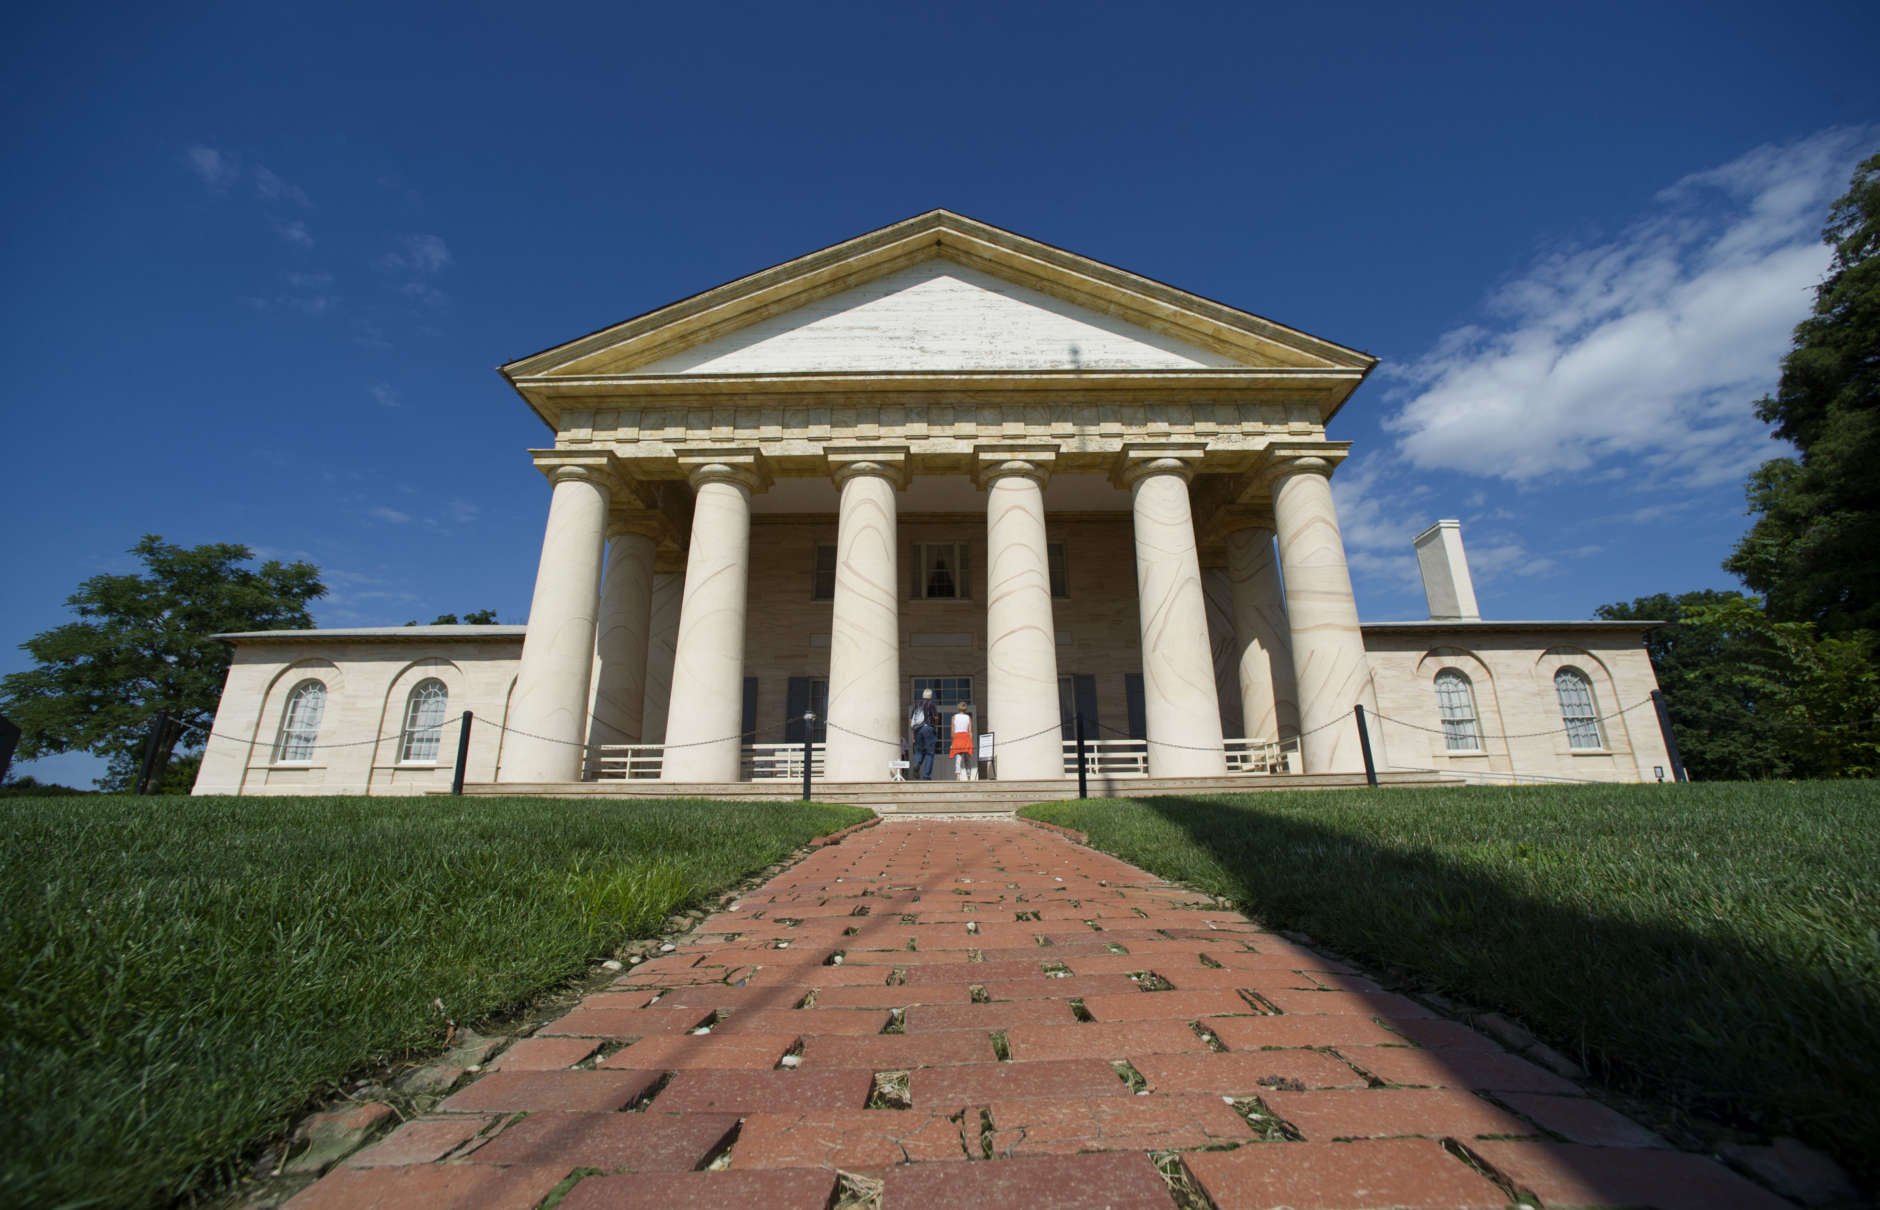 FILE - In this July 17, 2014, file photo, the historic Arlington House mansion is seen at Arlington National Cemetery in Arlington, Va. The historic house and plantation overlooking the nation's capital was home to Confederate Gen. Robert E. Lee. (AP Photo/Cliff Owen, File)